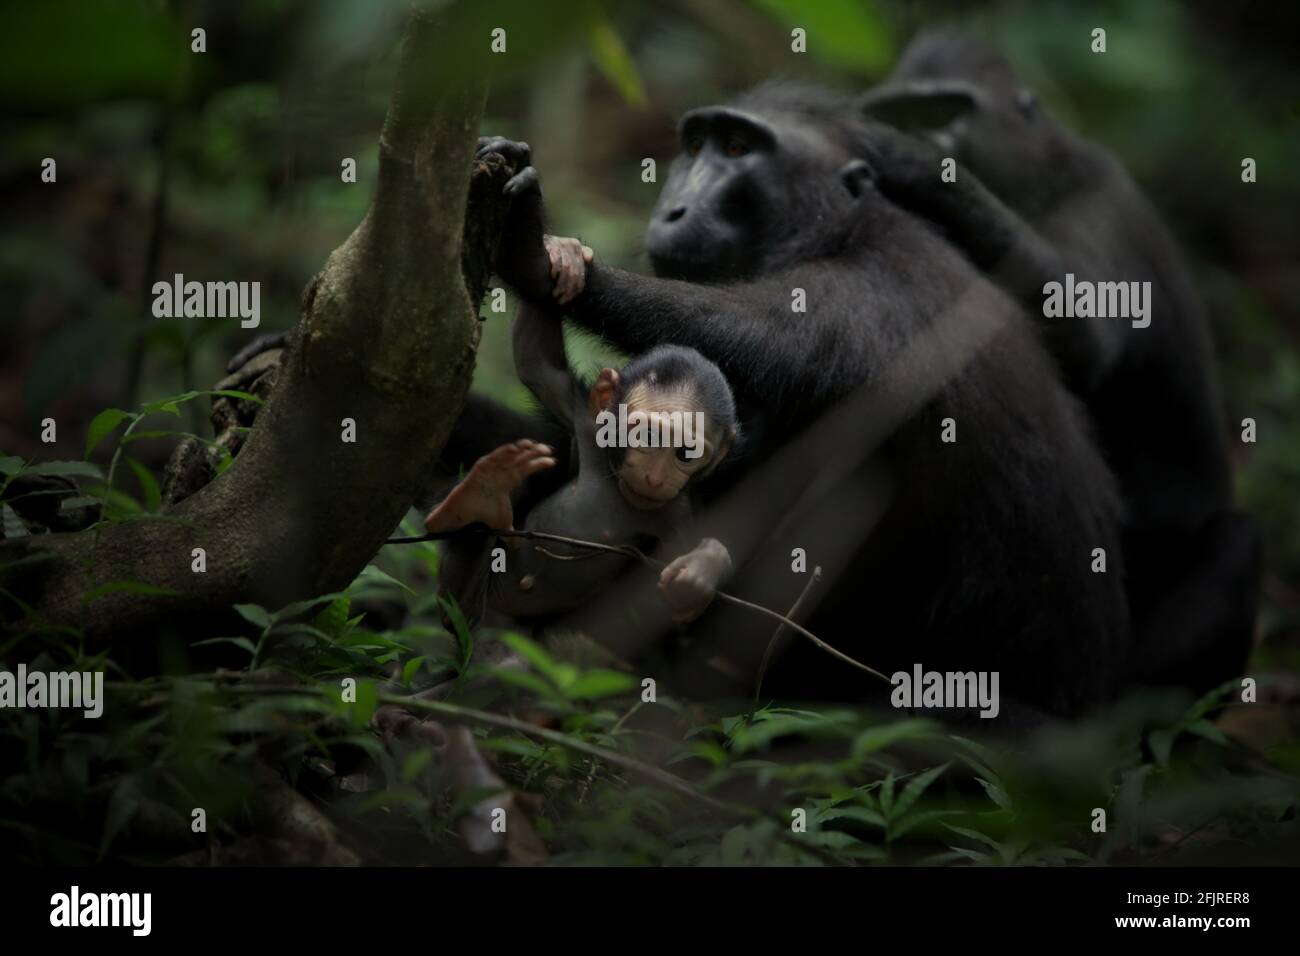 Celebes crested macaque (Macaca nigra) adult female individuals are taking care of an infant during social activity in Tangkoko forest, Indonesia. Stock Photo